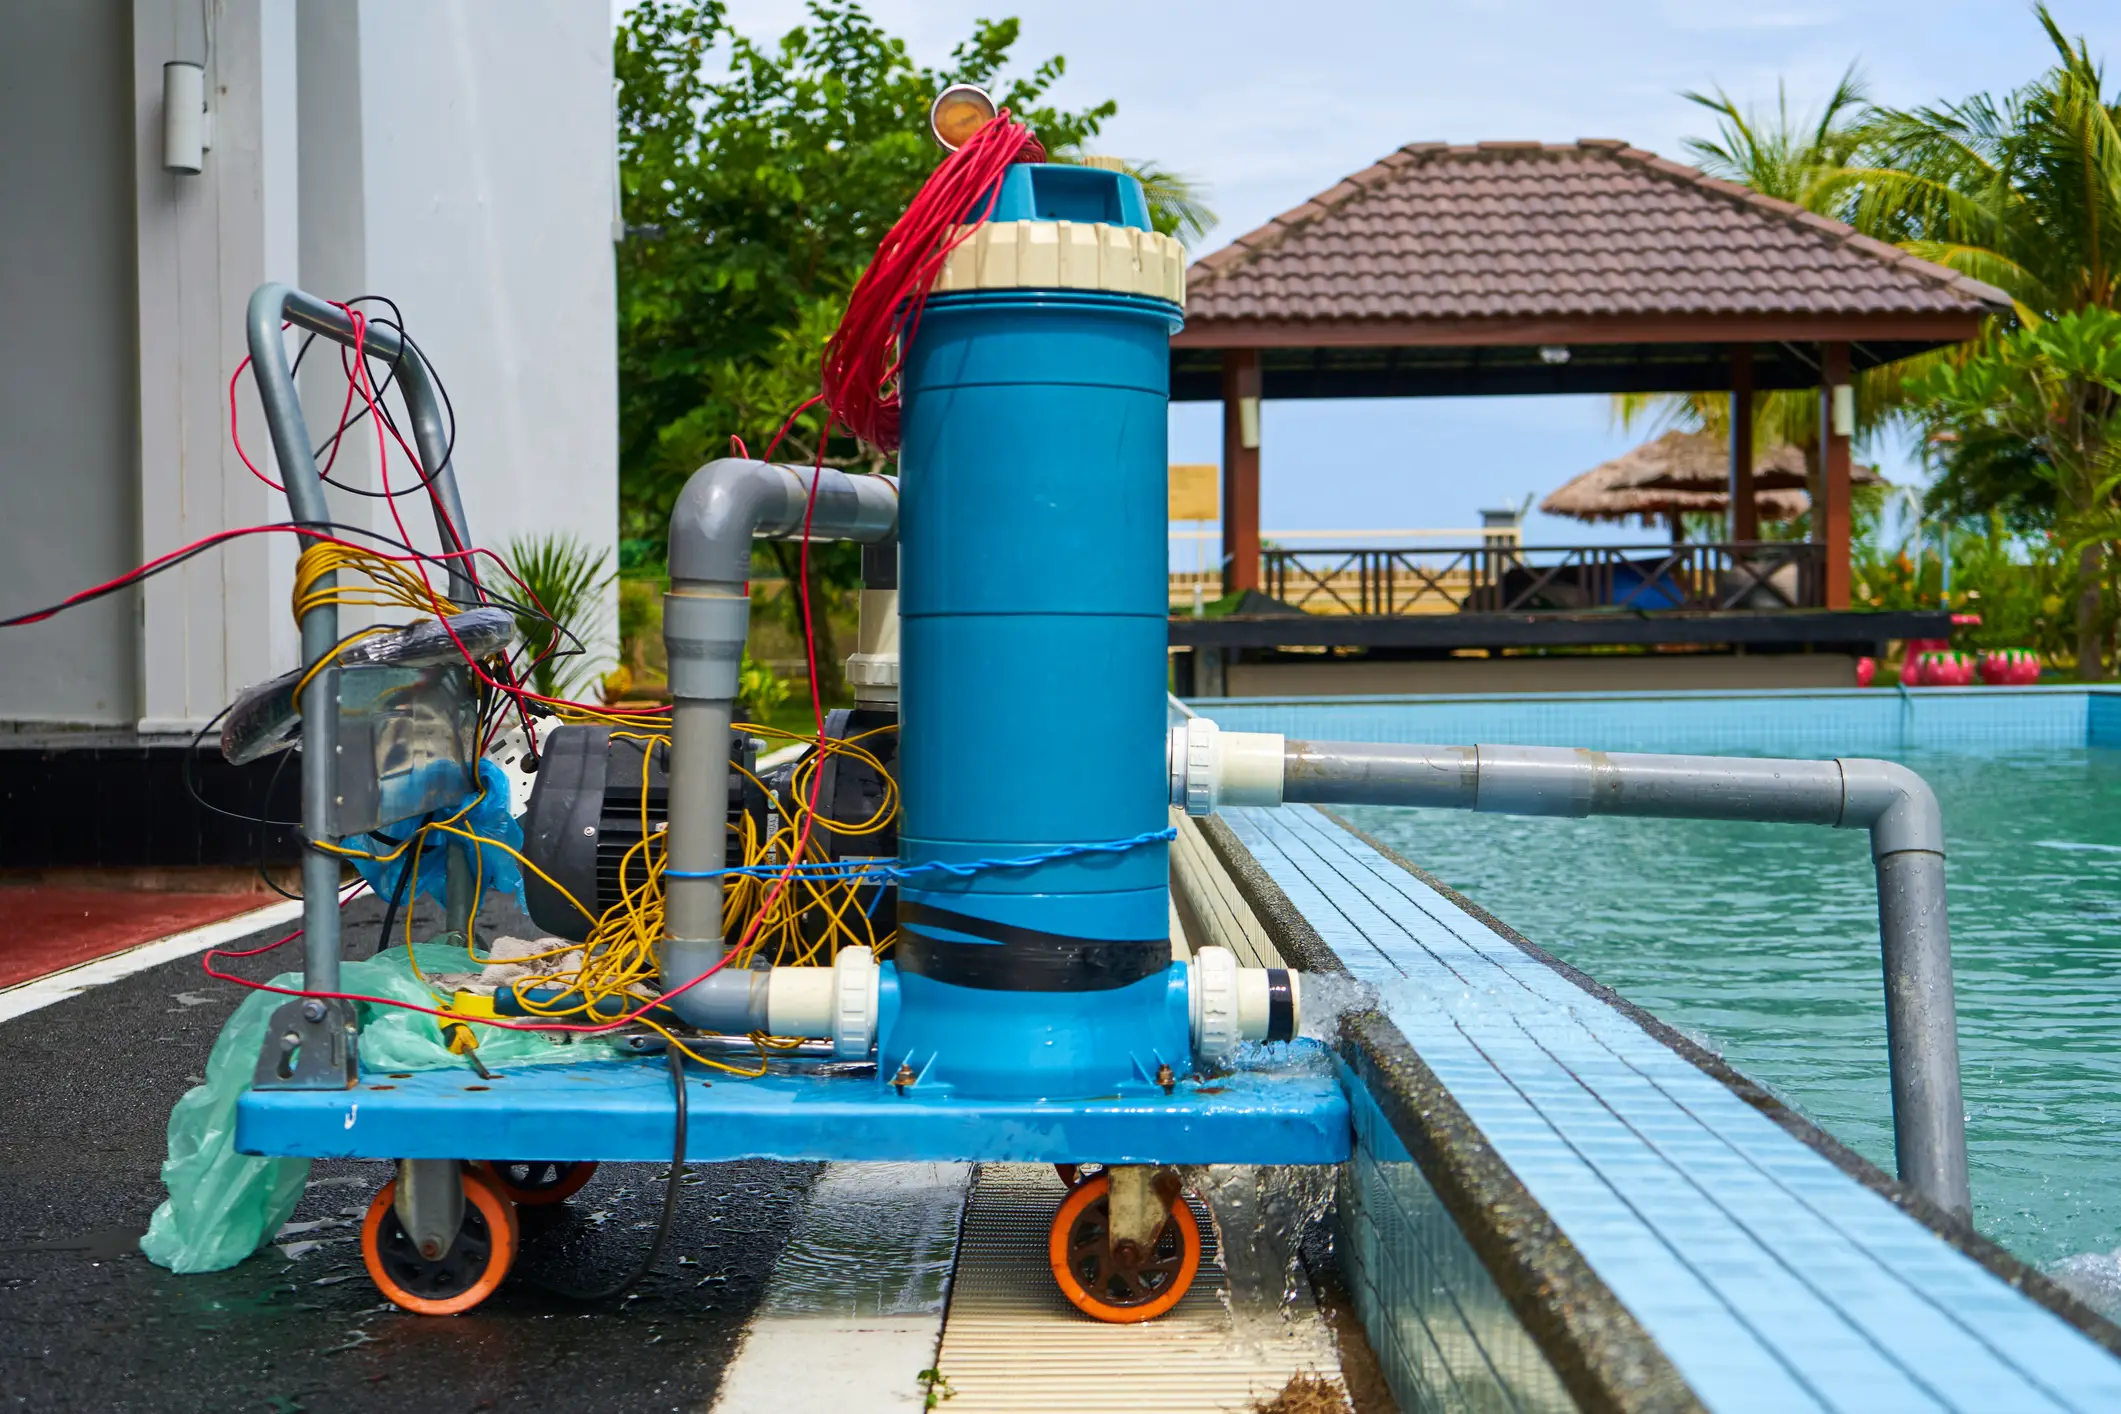 A filter pump cleans the pool water